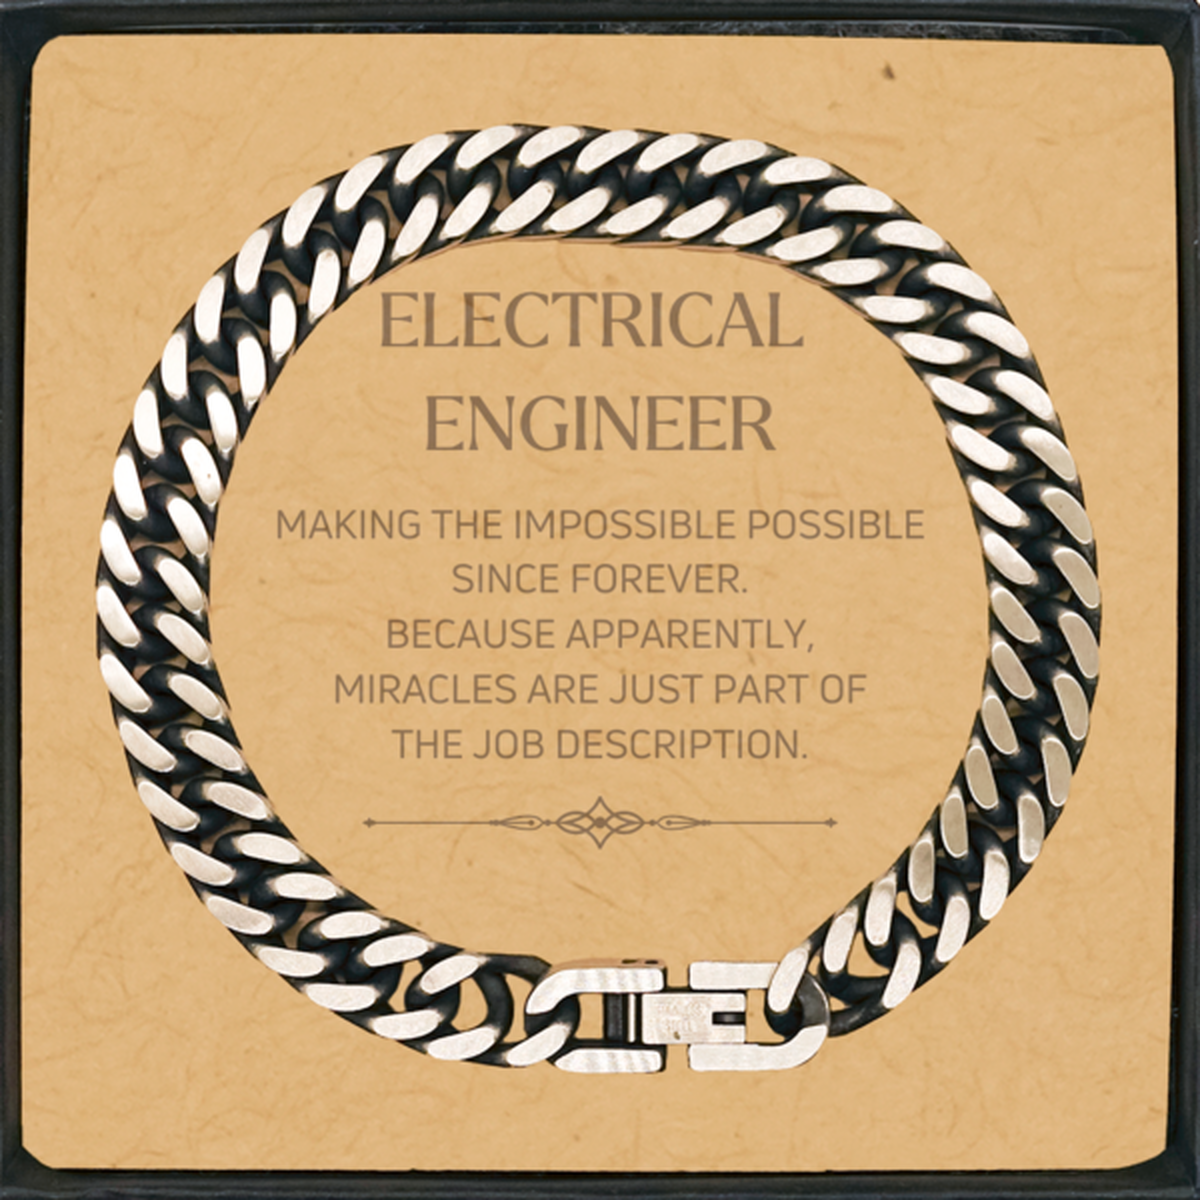 Funny Electrical Engineer Gifts, Miracles are just part of the job description, Inspirational Birthday Cuban Link Chain Bracelet For Electrical Engineer, Men, Women, Coworkers, Friends, Boss